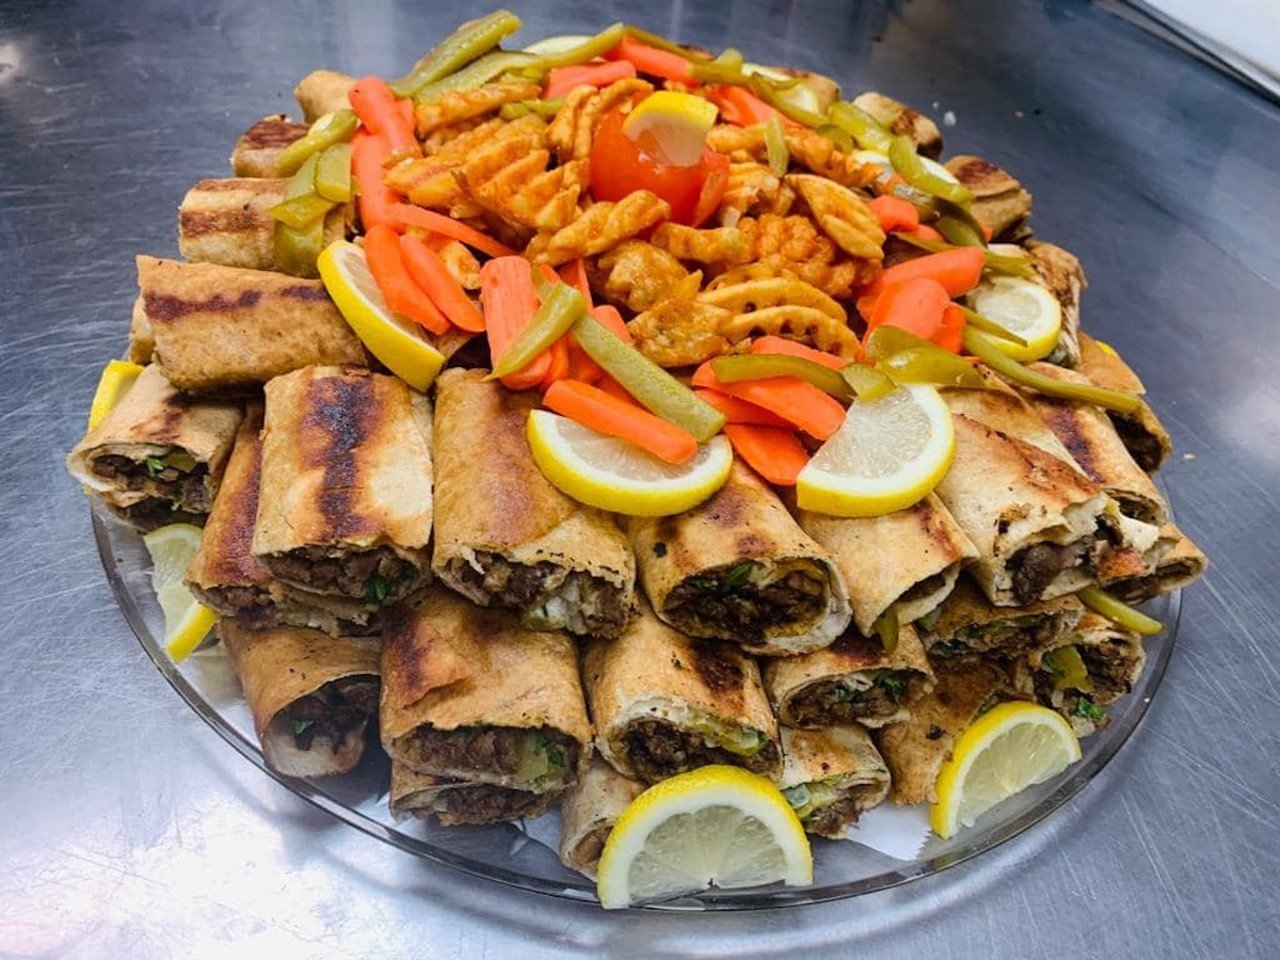 Baladi Restaurant
3307 Clifton Ave., Clifton
Baladi is not your typical strip mall restaurant. It offers delicious Middle Eastern and Arabic specialties like shawarma ($11.25), gyros ($10), falafel ($8.75 for a wrap or $10.75 for the chef special) and more, all made with fresh ingredients. They also offer fresh, savory baked goods and pastry favorites like baklava ($4).